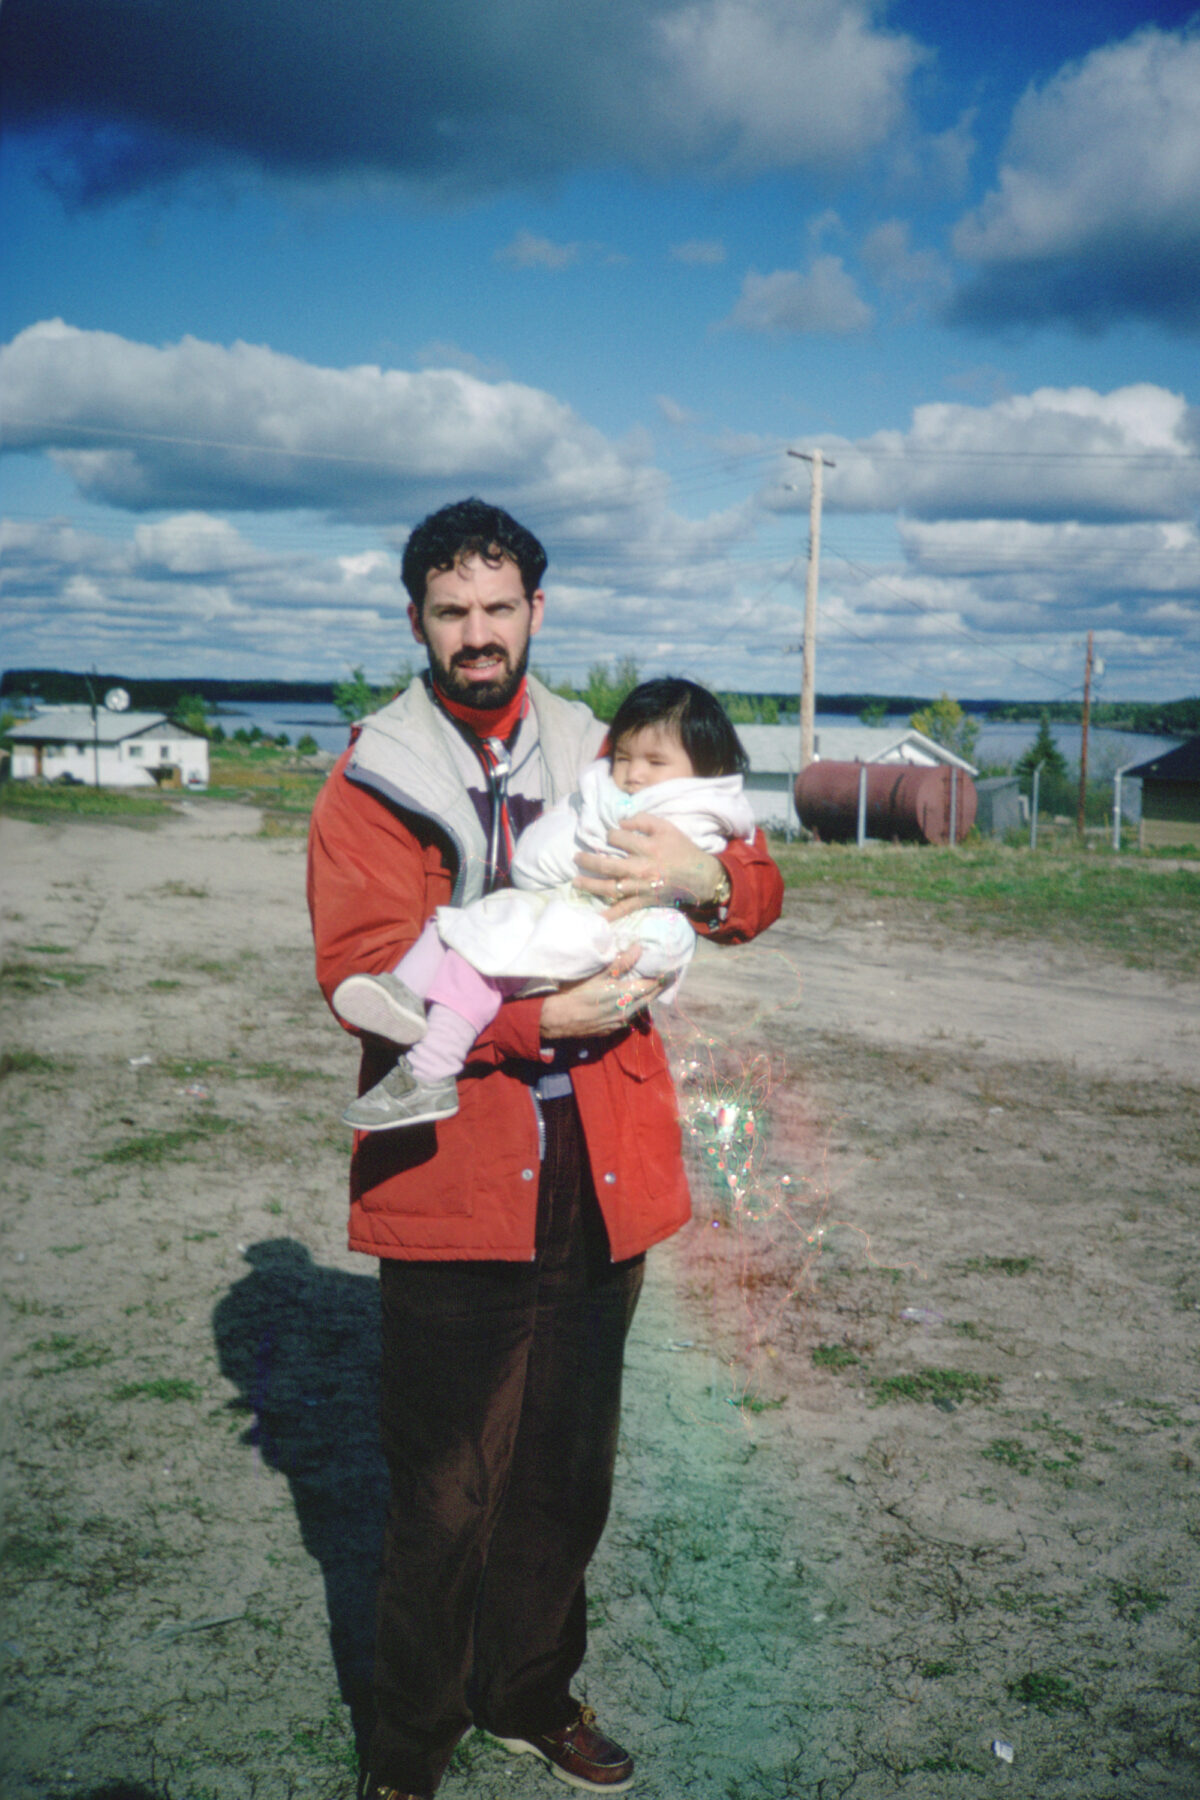 A man in a red jacket holding a small child.